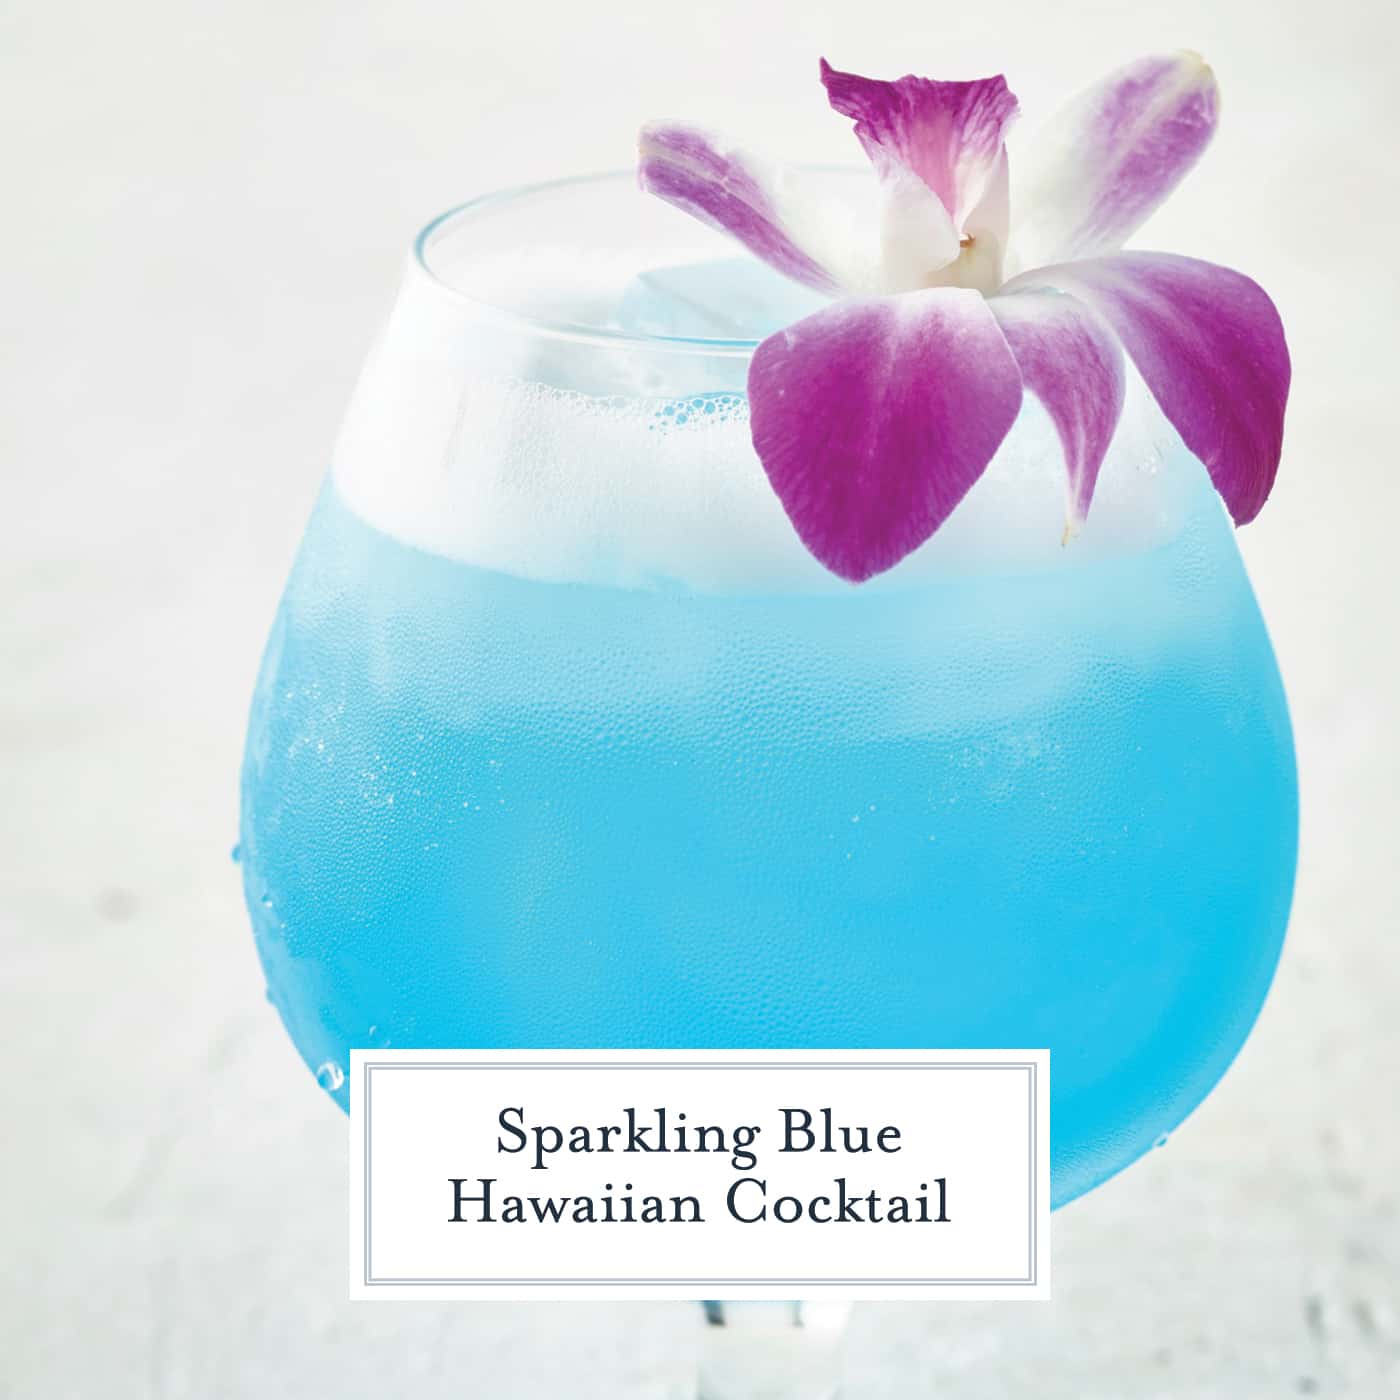 Sparkling Blue Hawaiian Cocktail is a refreshing tropical cocktail recipe perfect for luau theme parties or a lazy Sunday afternoon. #bluehawaiian #cocktailrecipes #tropicaldrinks www.savoryexperiments.com 